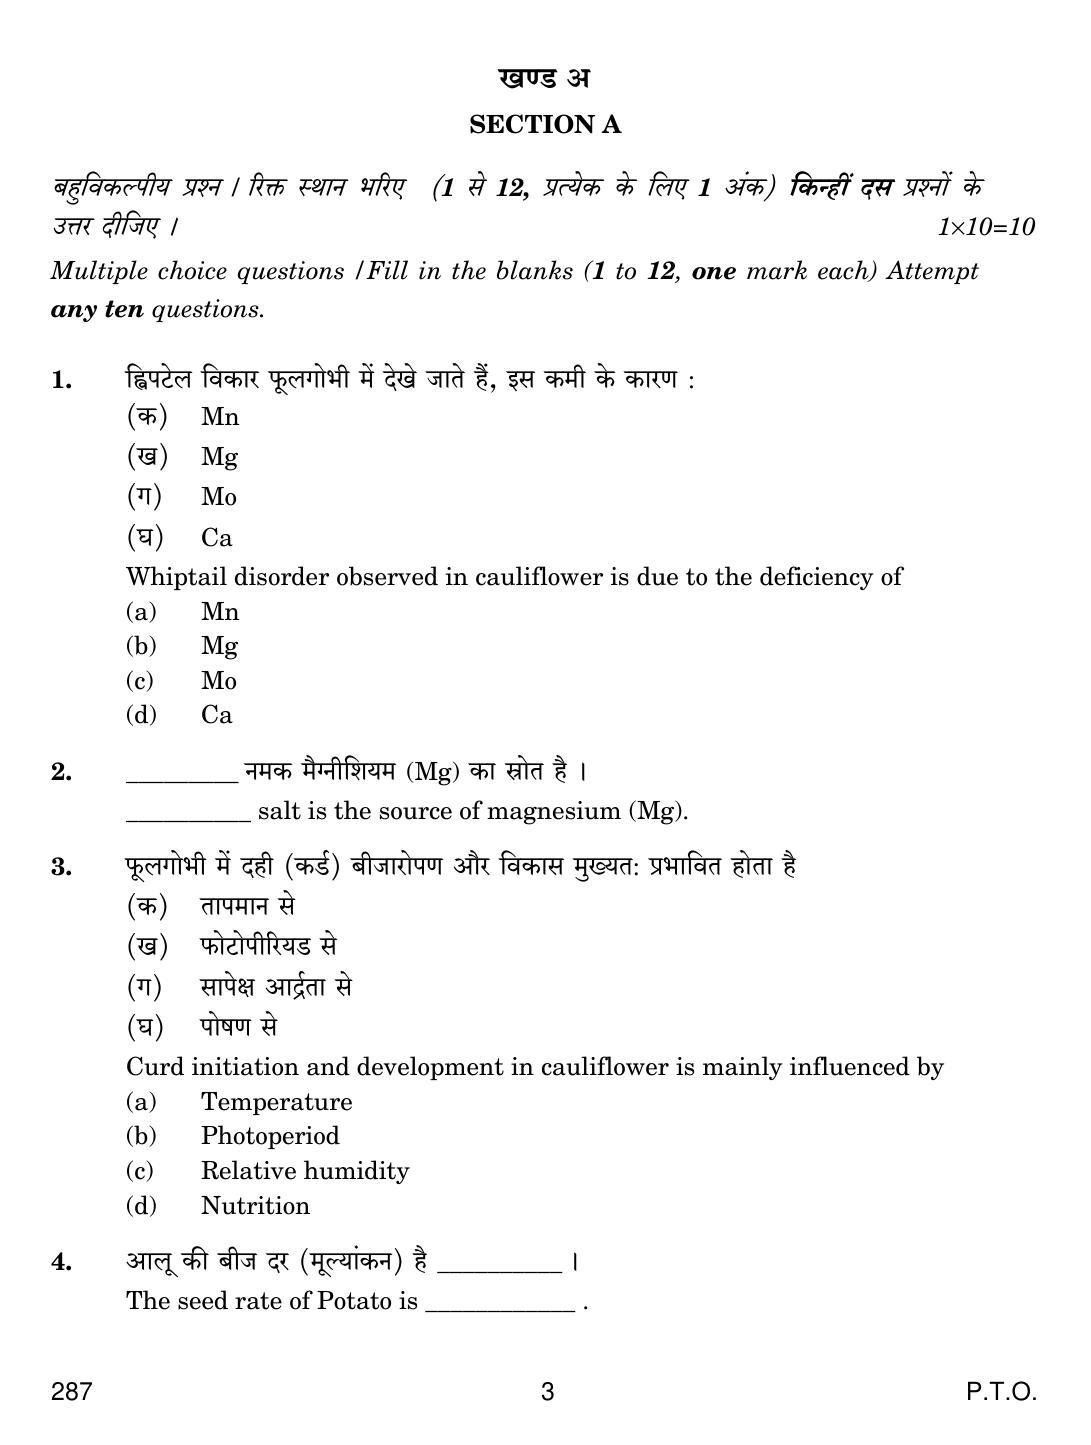 CBSE Class 12 287 Olericulture 2019 Question Paper - Page 3